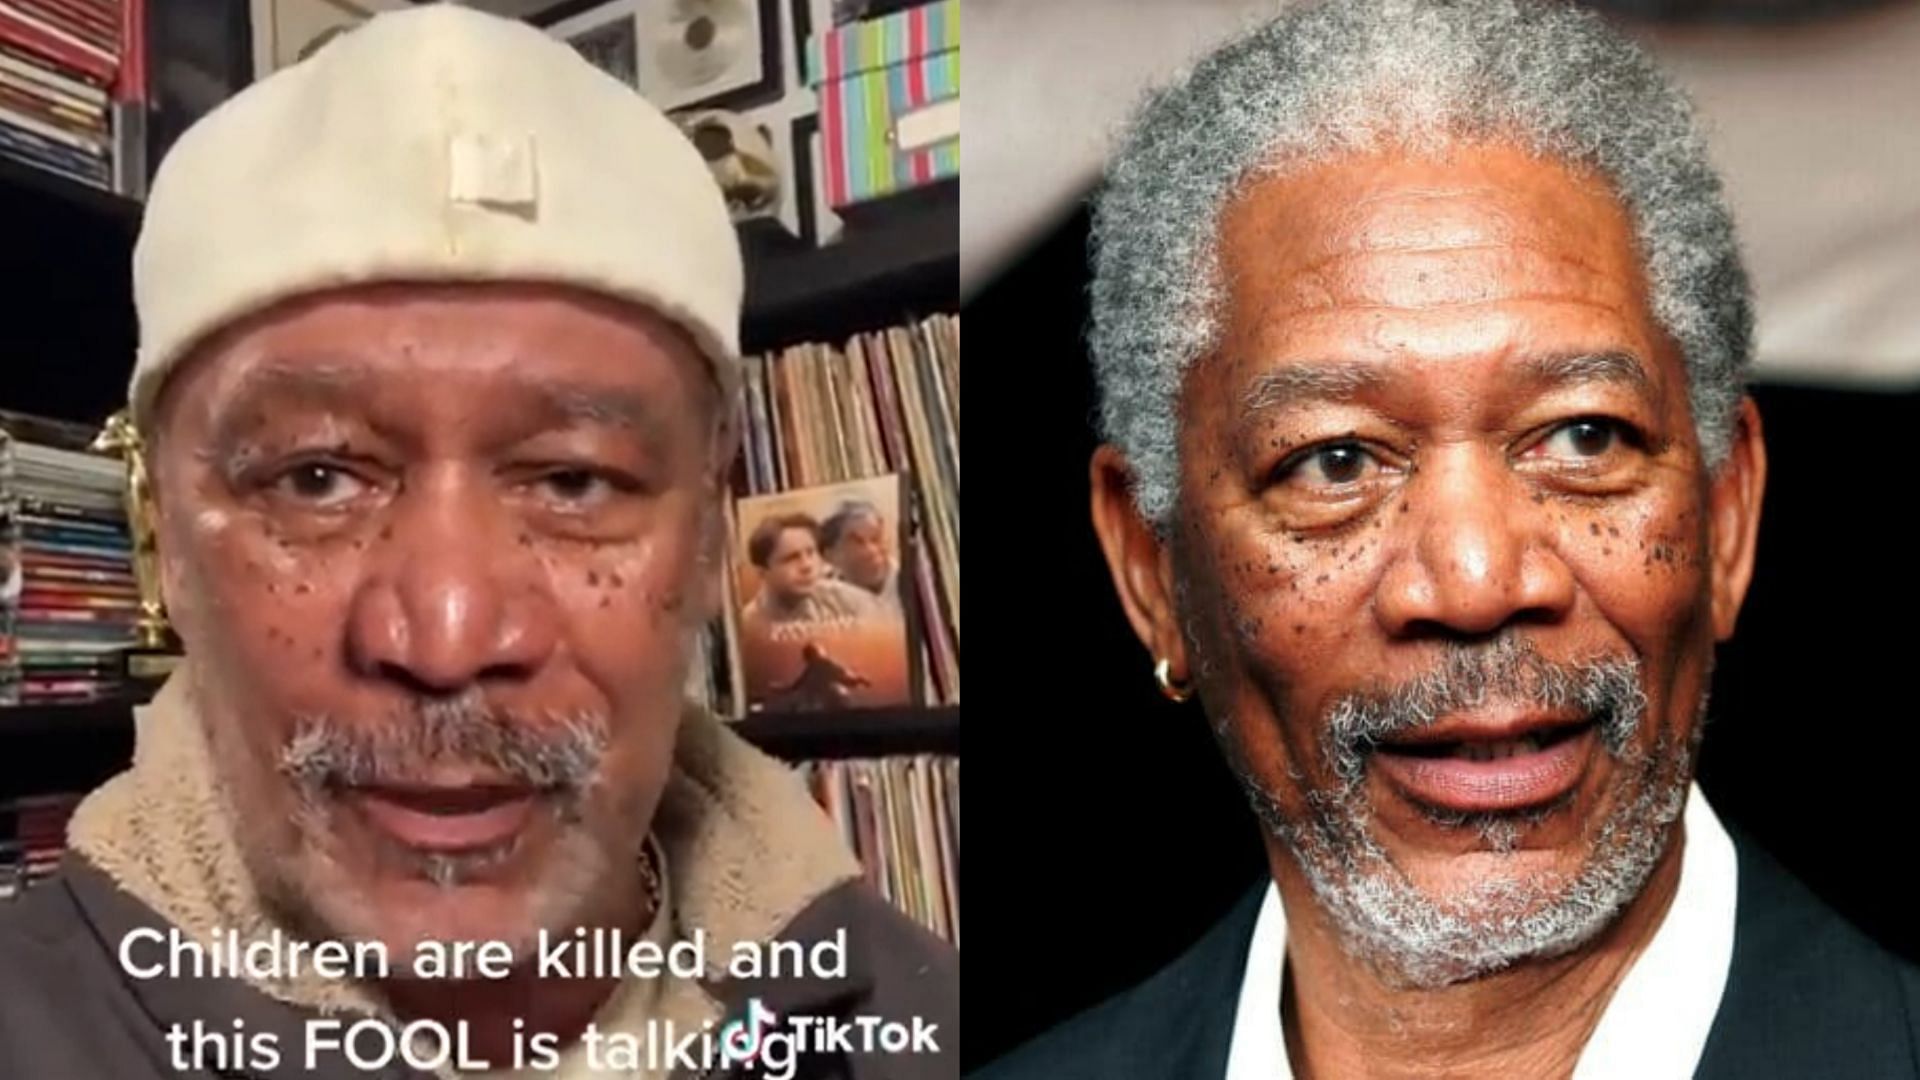 Deep fake of Morgan Freeman goes viral across social media platforms (Image via realstewpeters/Twitter and Getty Images)